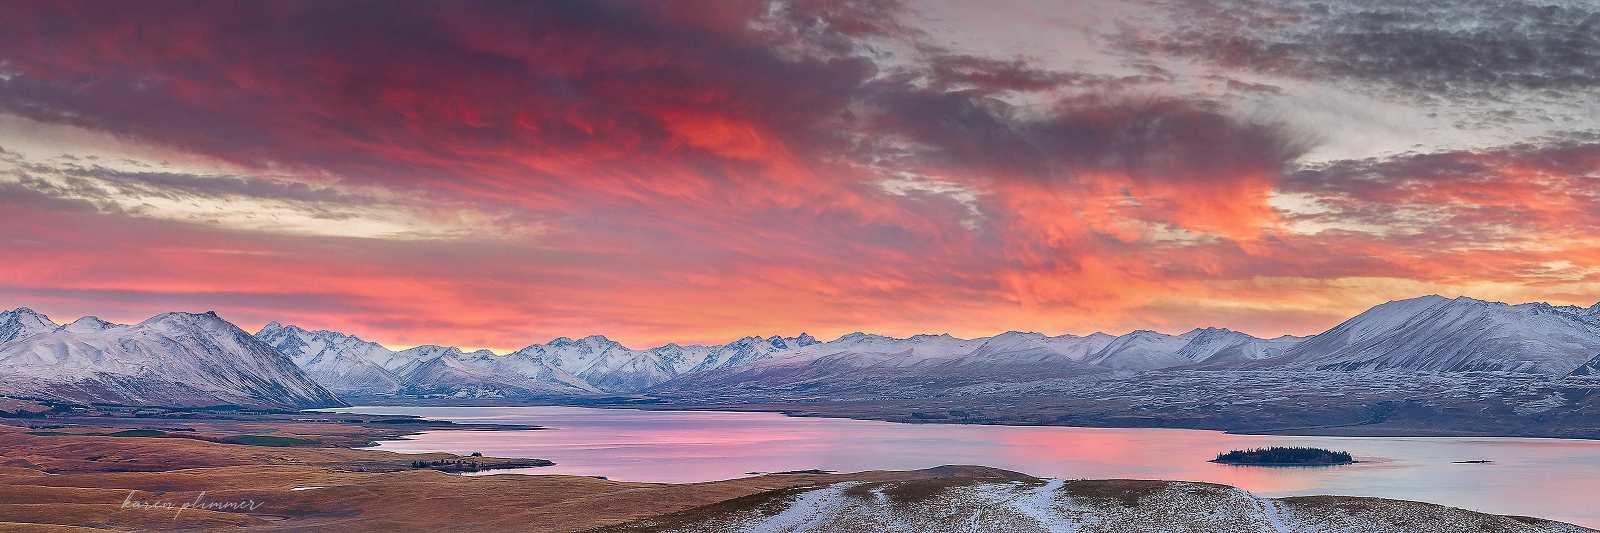 A view of the snow-covered mountains surrounding Lake Tekapo, New Zealand with an very colourful sunrise.